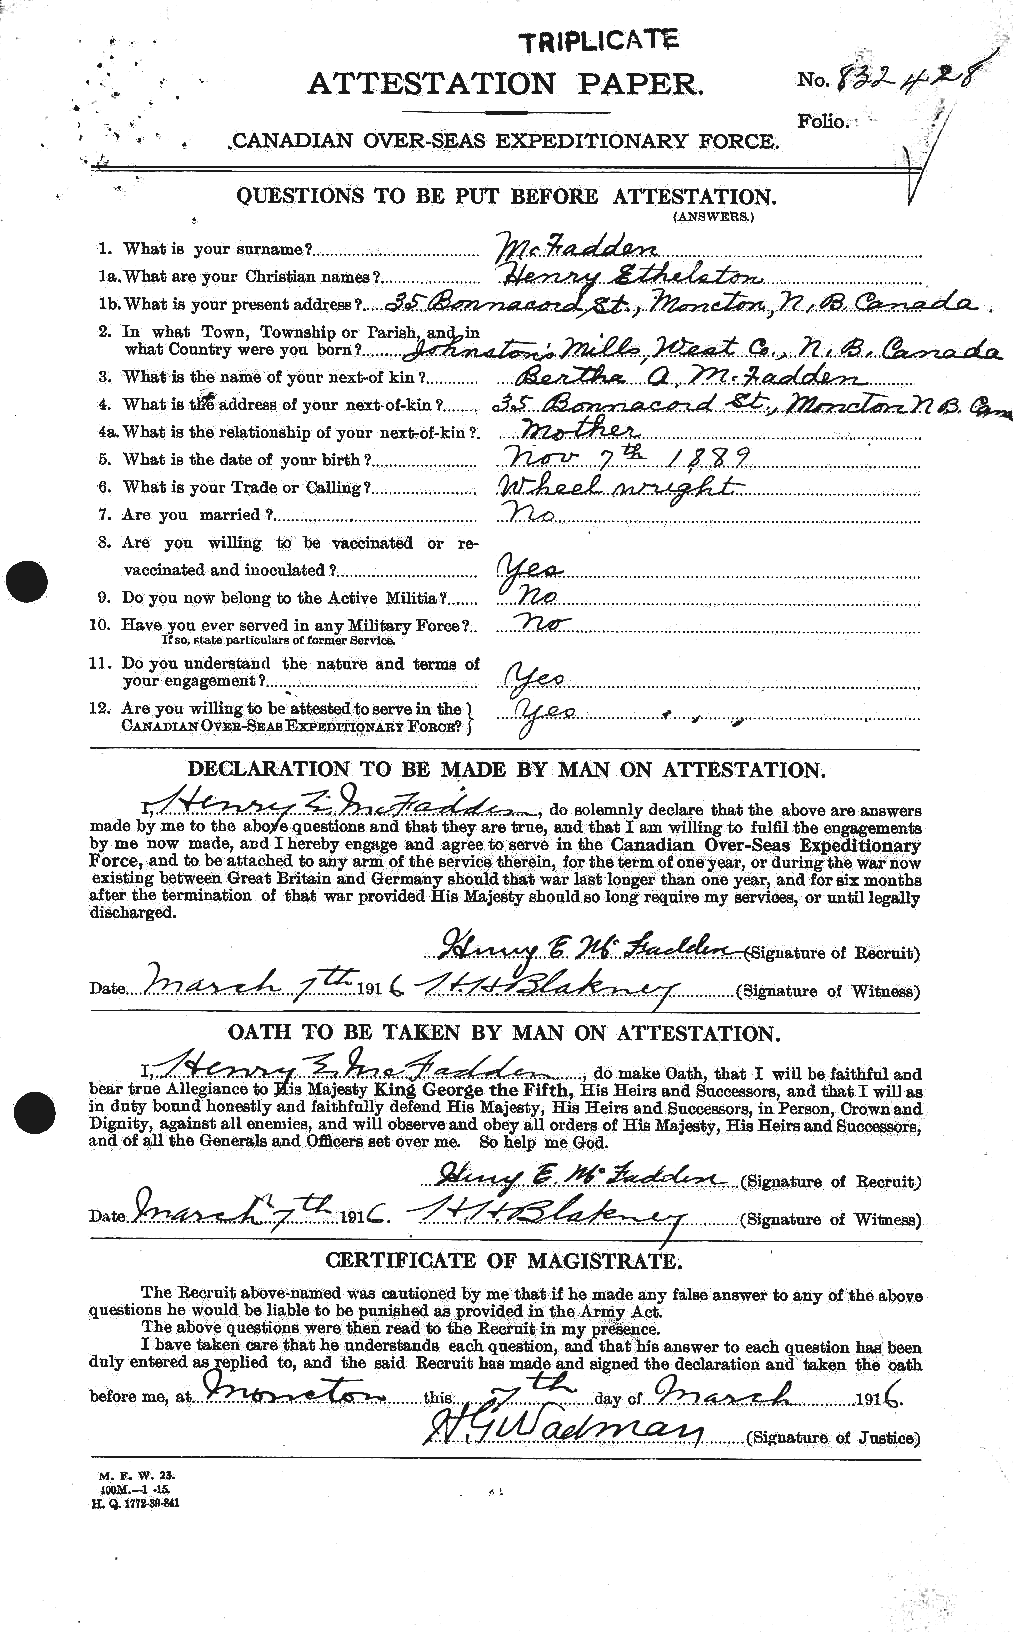 Personnel Records of the First World War - CEF 521064a